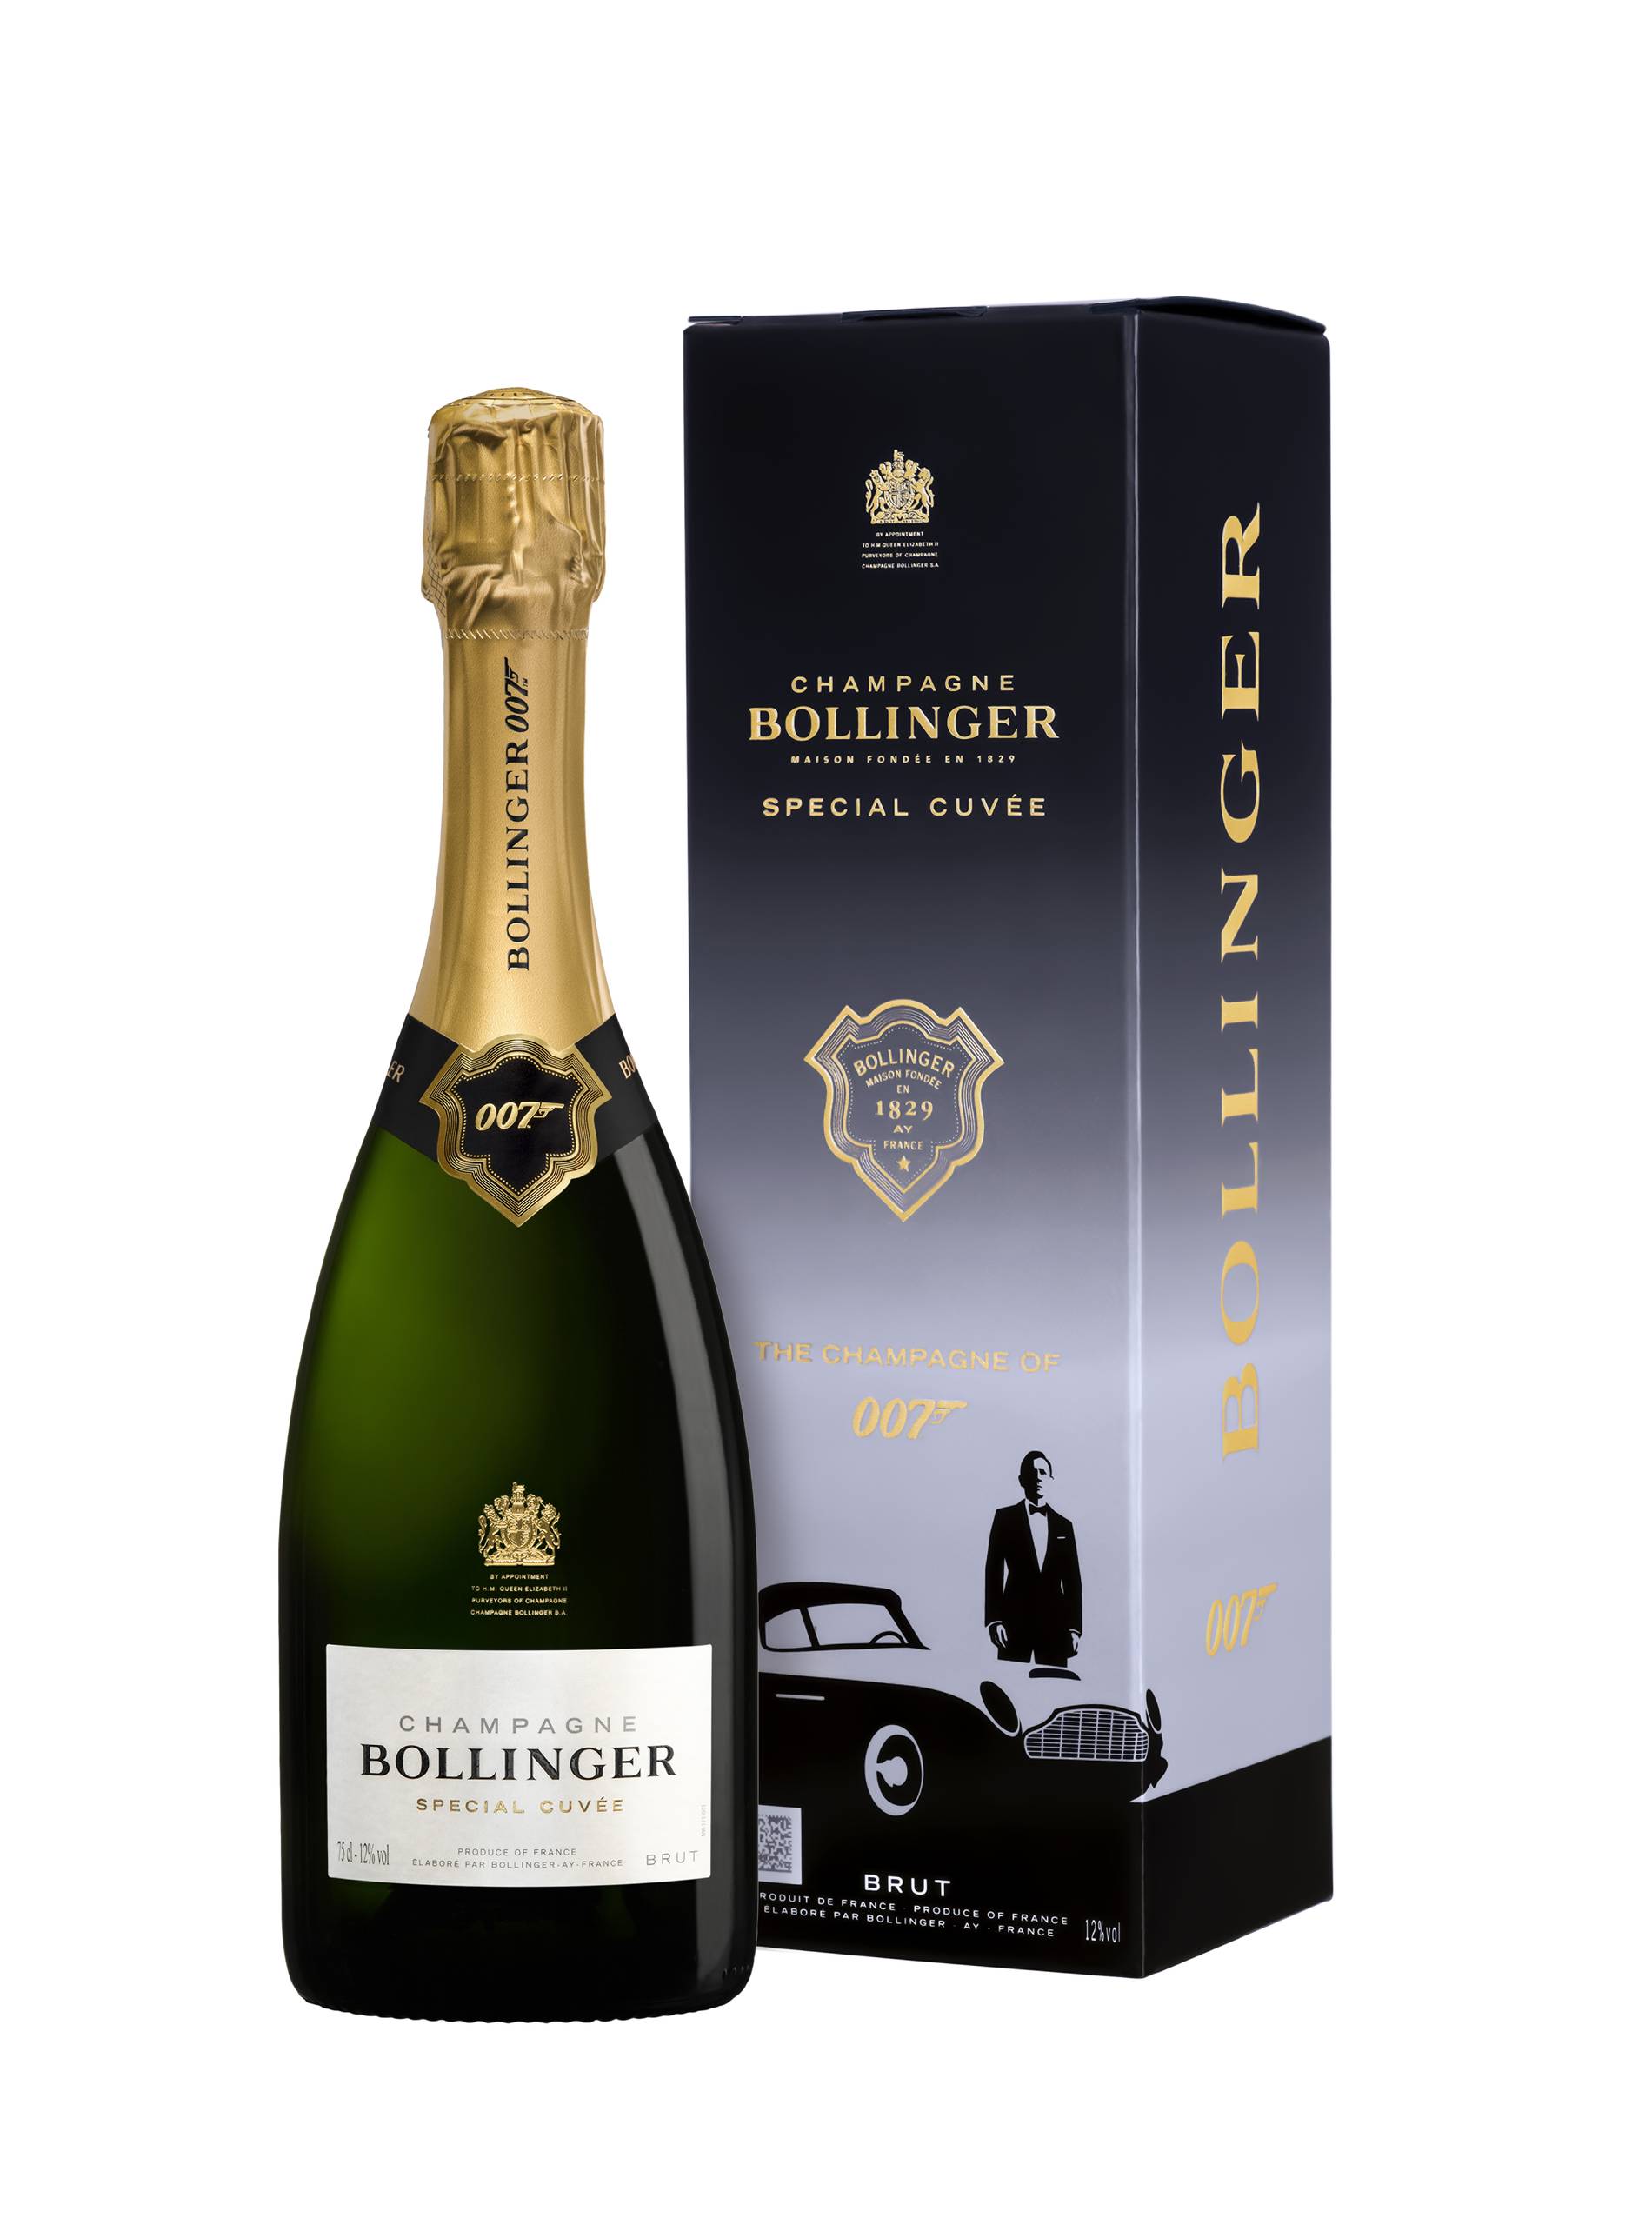 Bollinger champagne limited edition special cuvee 007 bottle and box